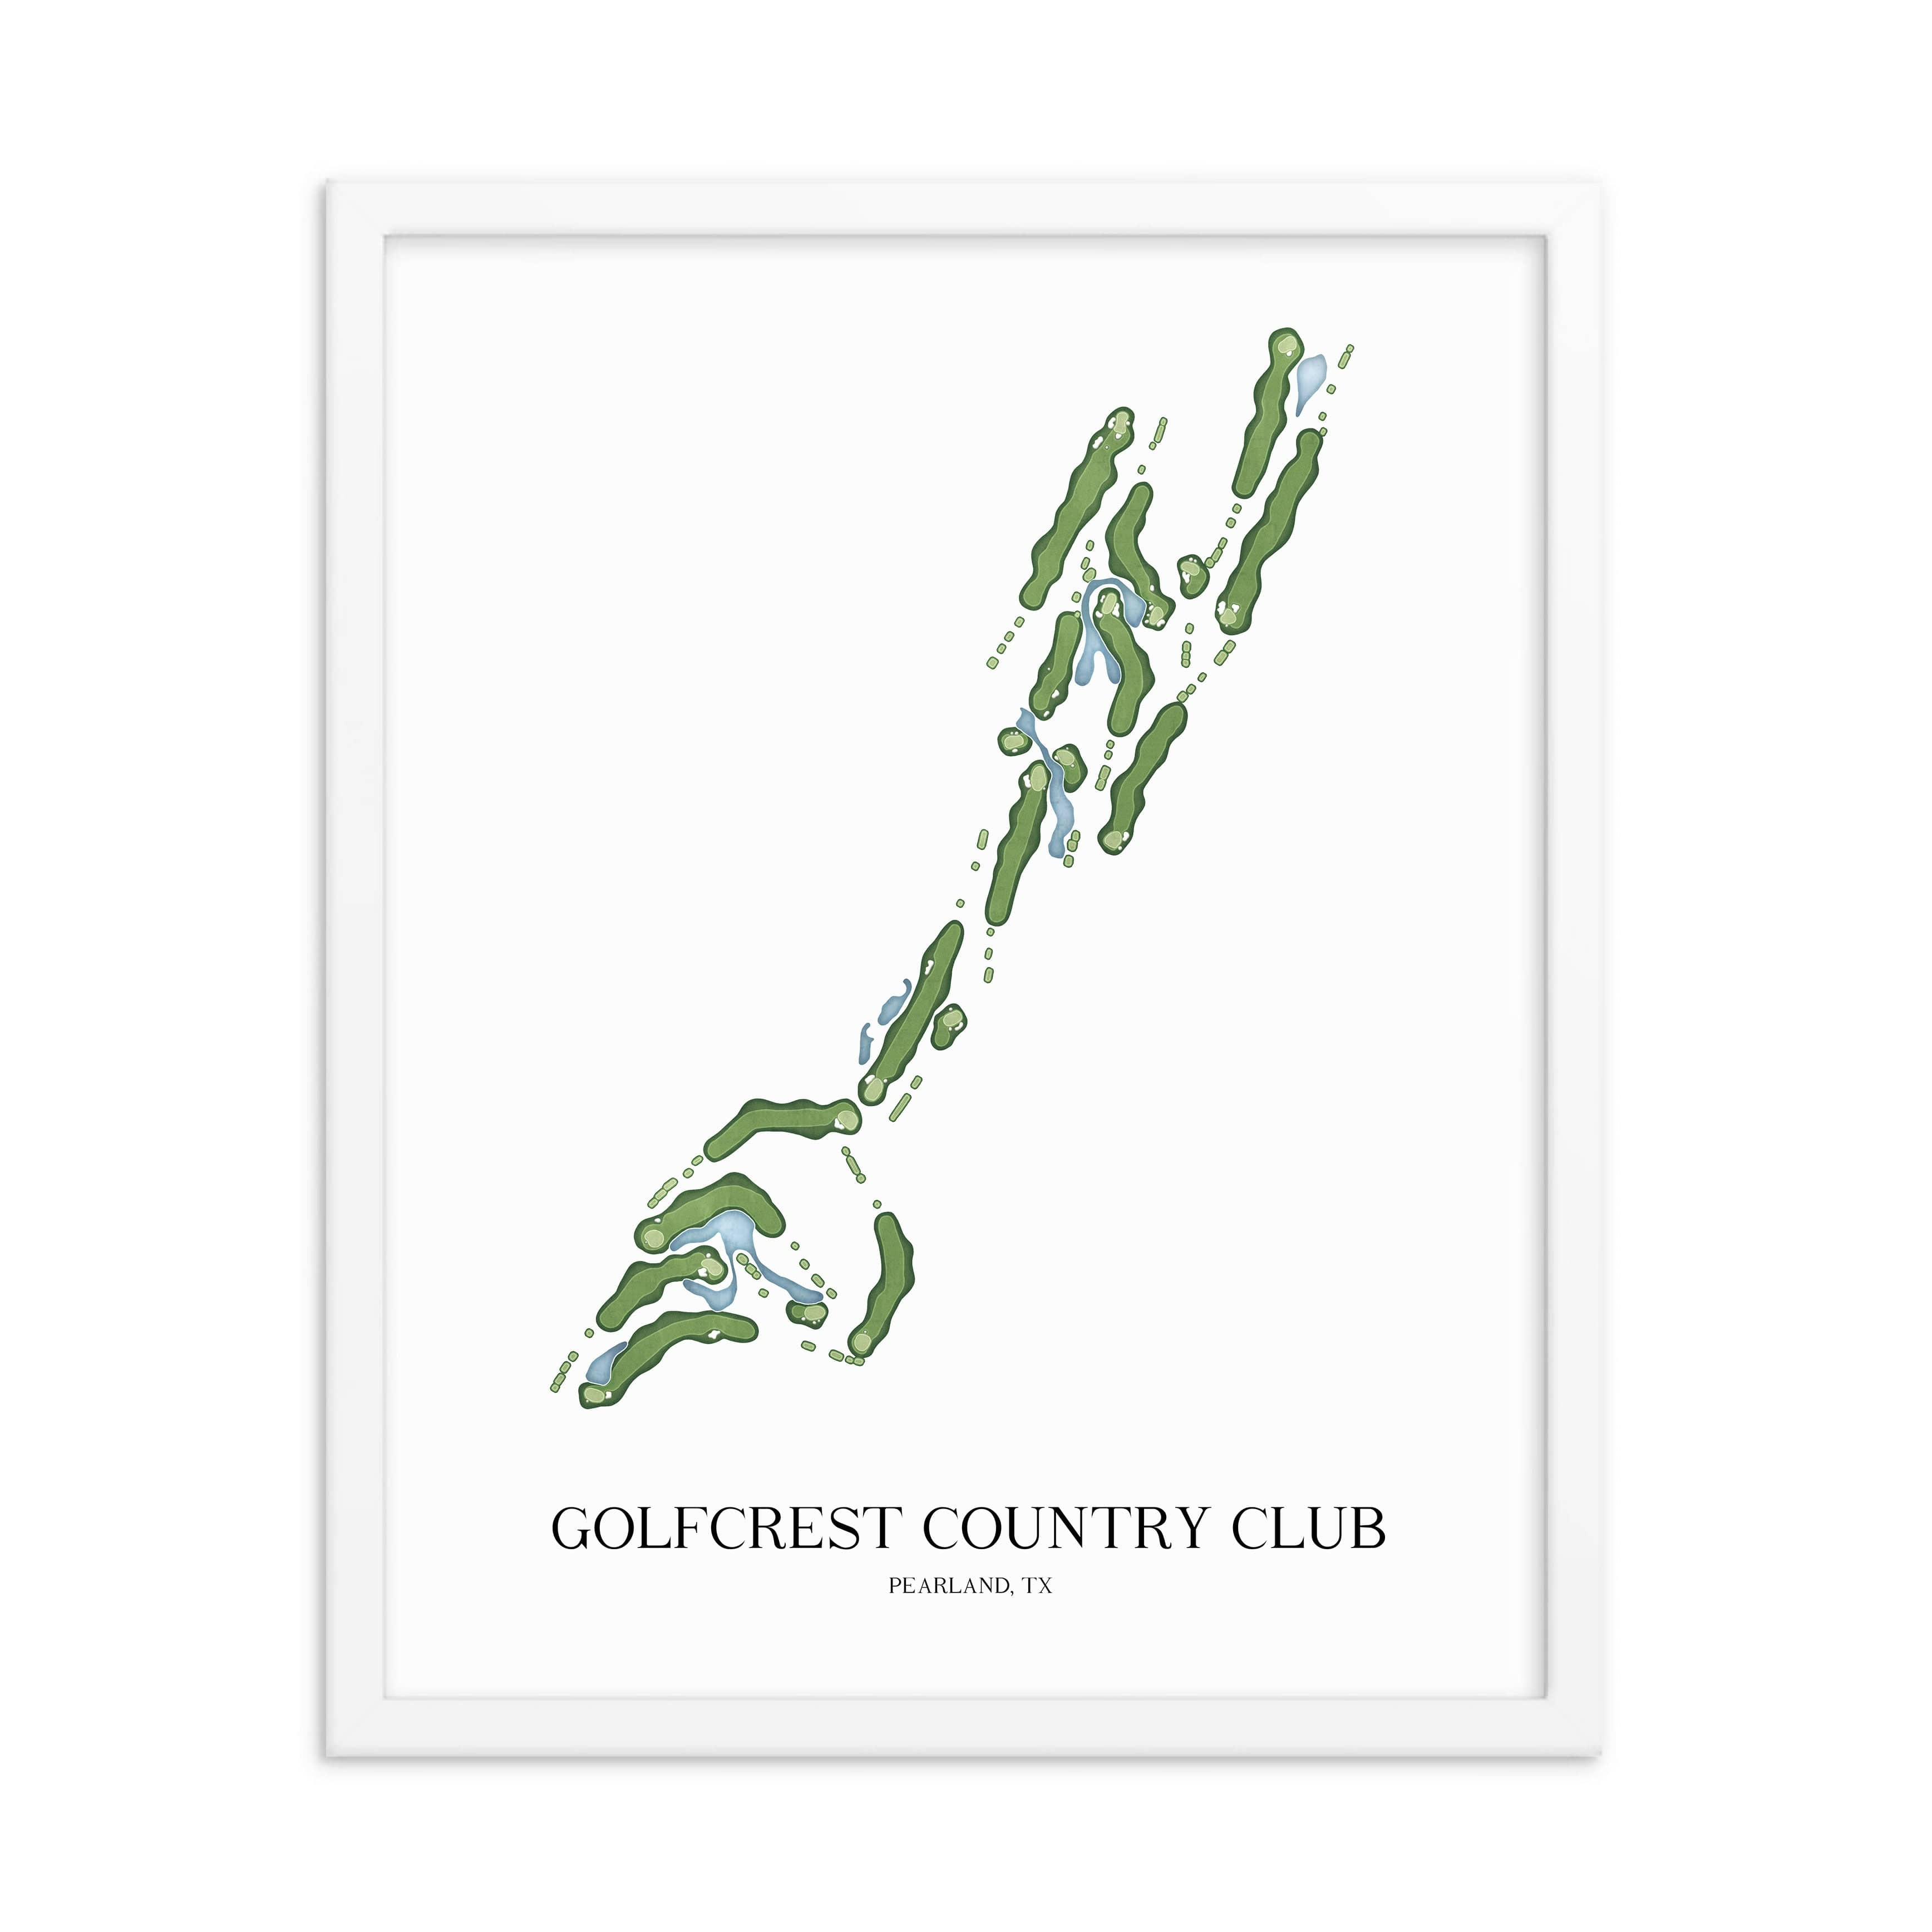 The 19th Hole Golf Shop - Golf Course Prints -  Golfcrest Country Club Golf Course Map